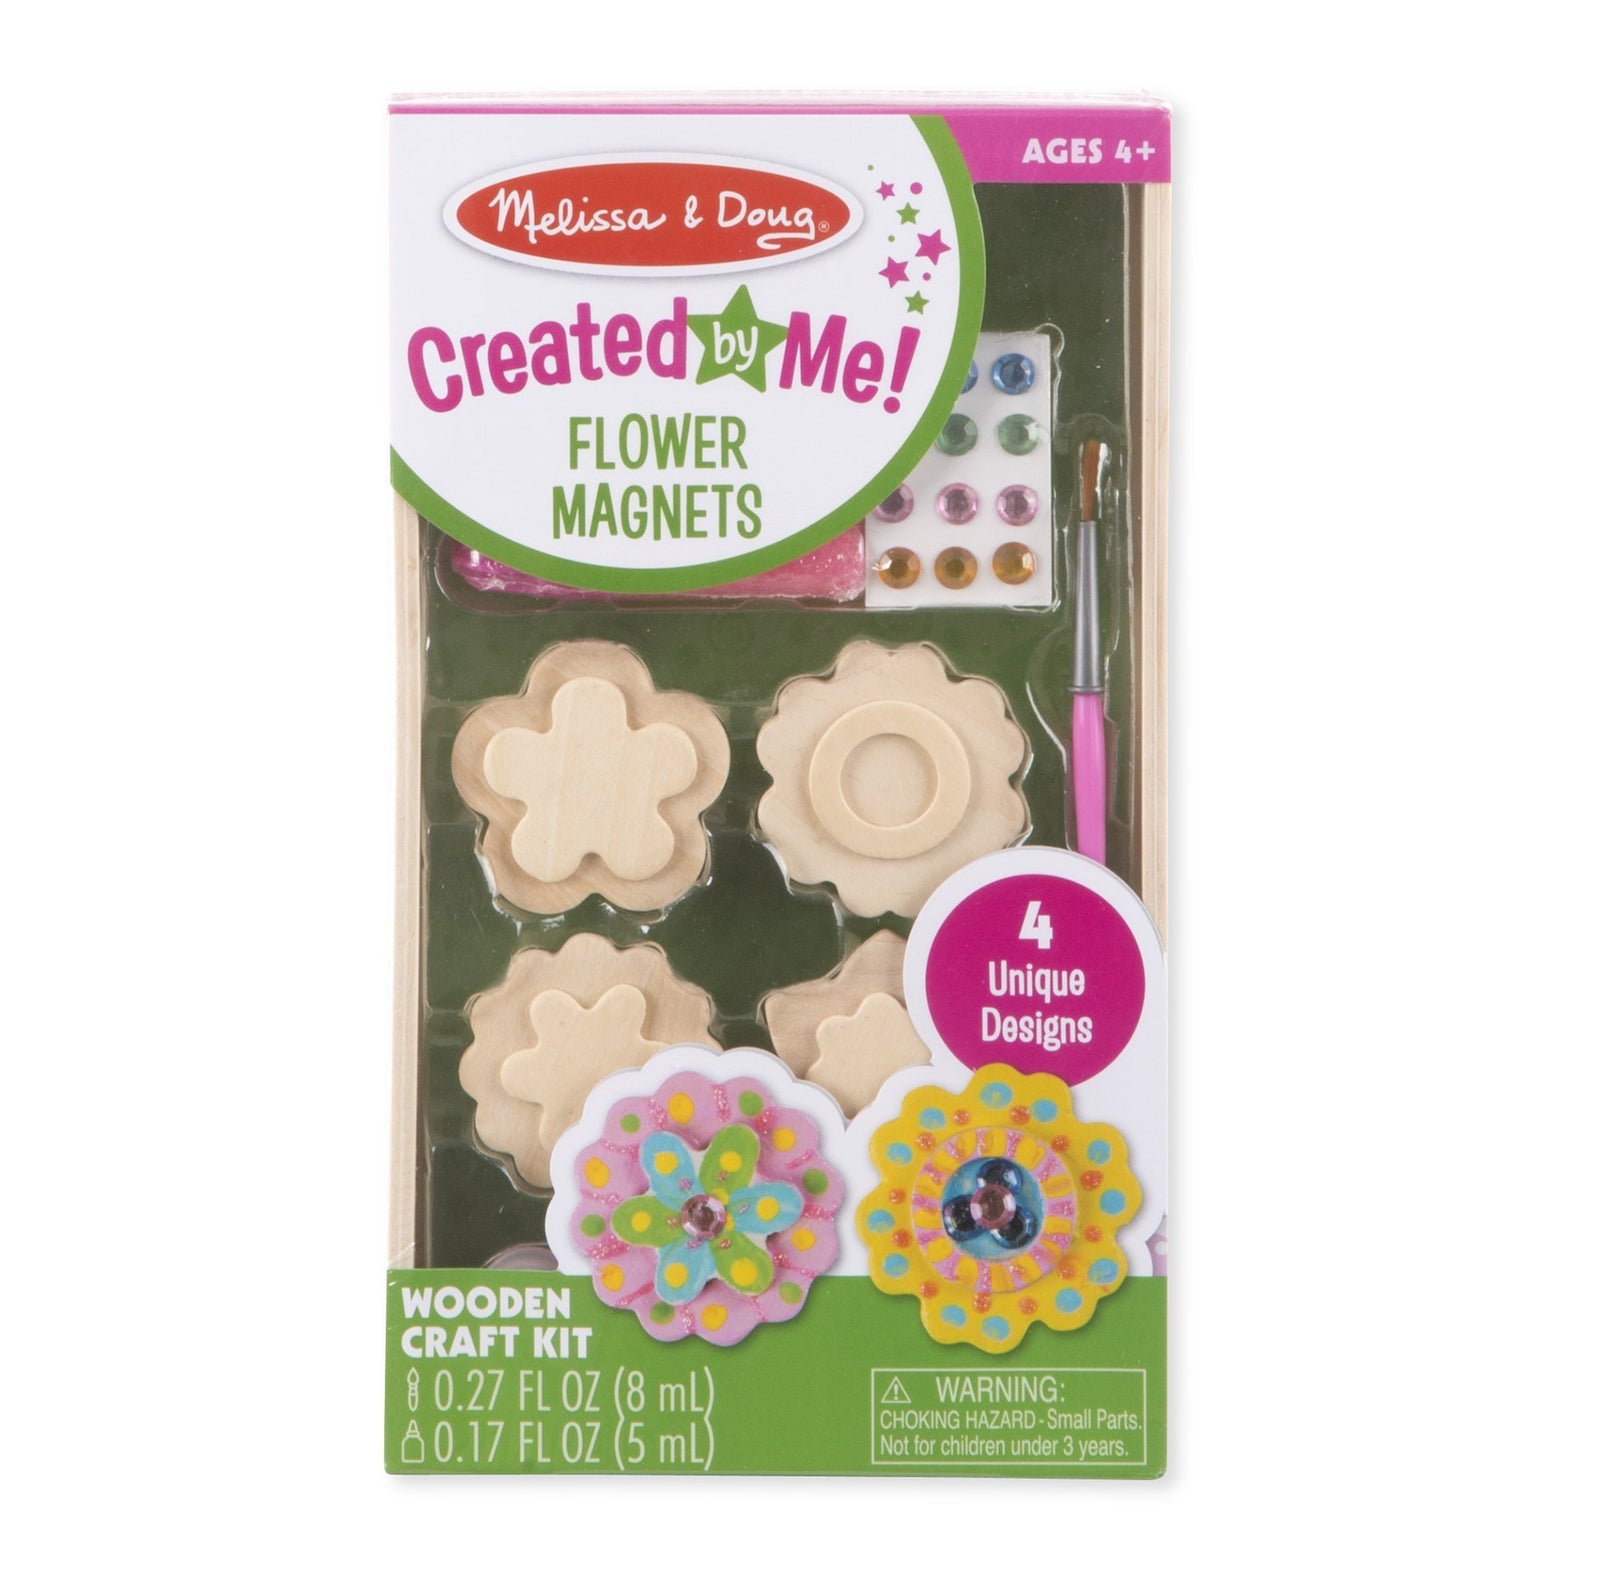 Melissa & Doug Created by Me! Flower Wooden Magnets Craft Kit (4 Designs, 4 Paints, Stickers, Glitter Glue)